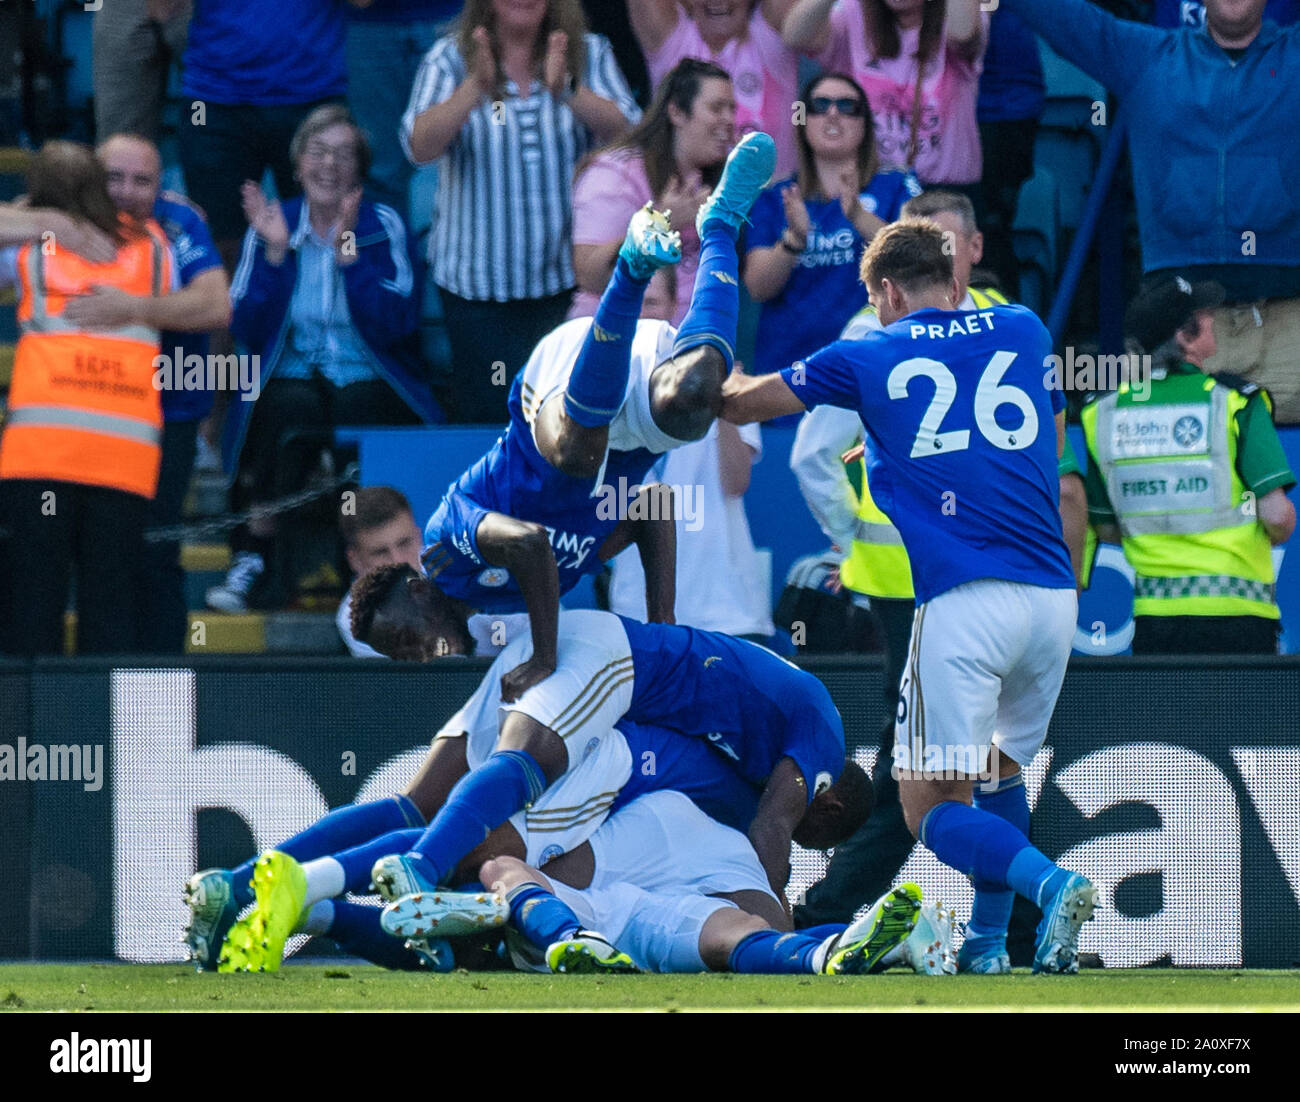 LEICESTER, ENGLAND - SEPTEMBER 21: James Maddison,of Leicester City celebrate with he’s team mates Demarai Gray, Ricardo Pereira and Wilfred Ndidi after scoring goal during the Premier League match between Leicester City and Tottenham Hotspur at The King Power Stadium on September 21, 2019 in Leicester, United Kingdom. (Photo by Sebastian Frej/MB Media) Stock Photo